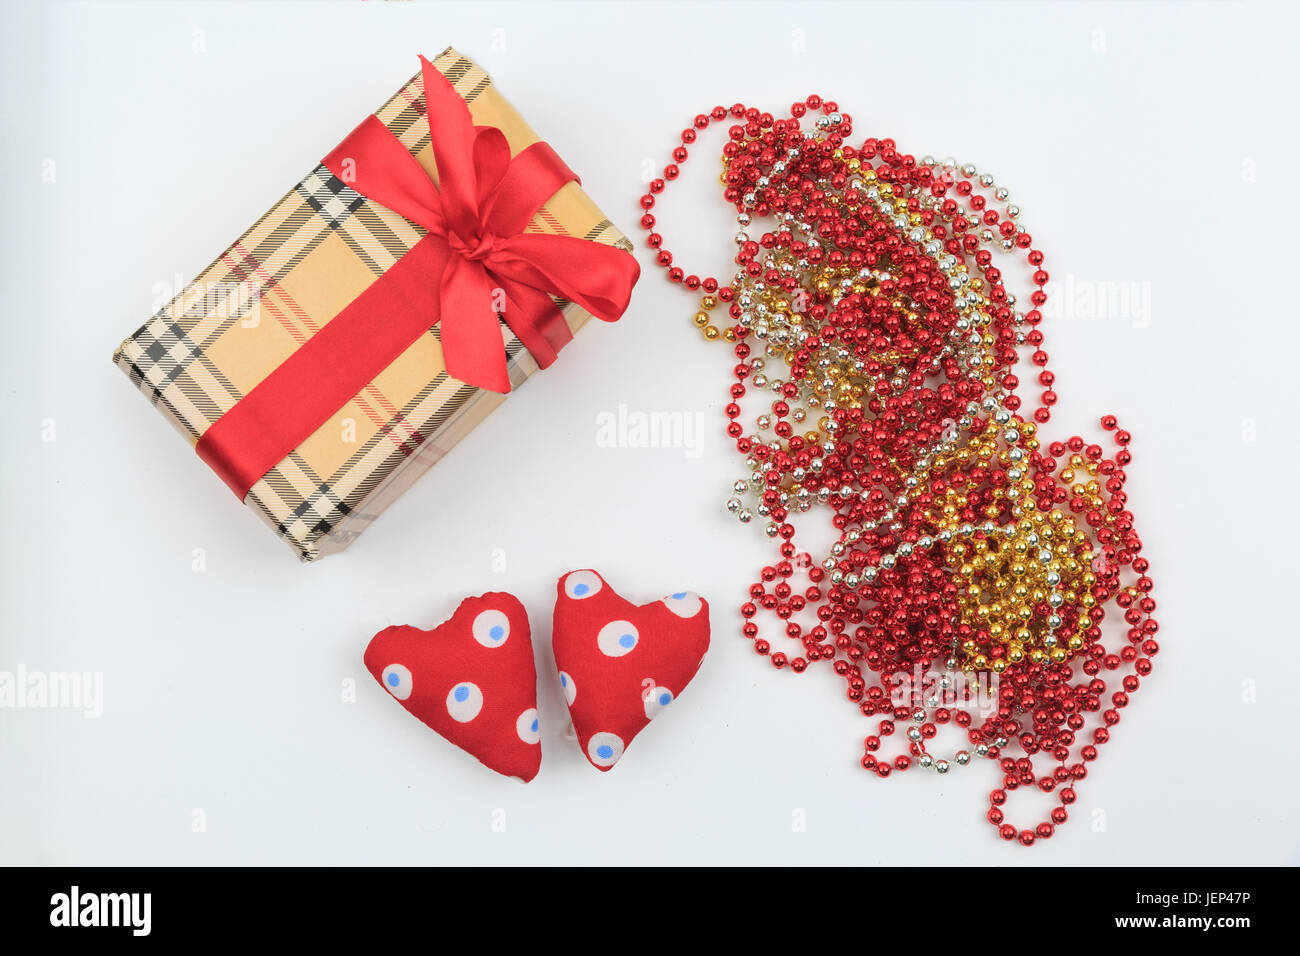 Gift box, beads and heart shape on white backgroud. Top view. Flat lay Stock Photo